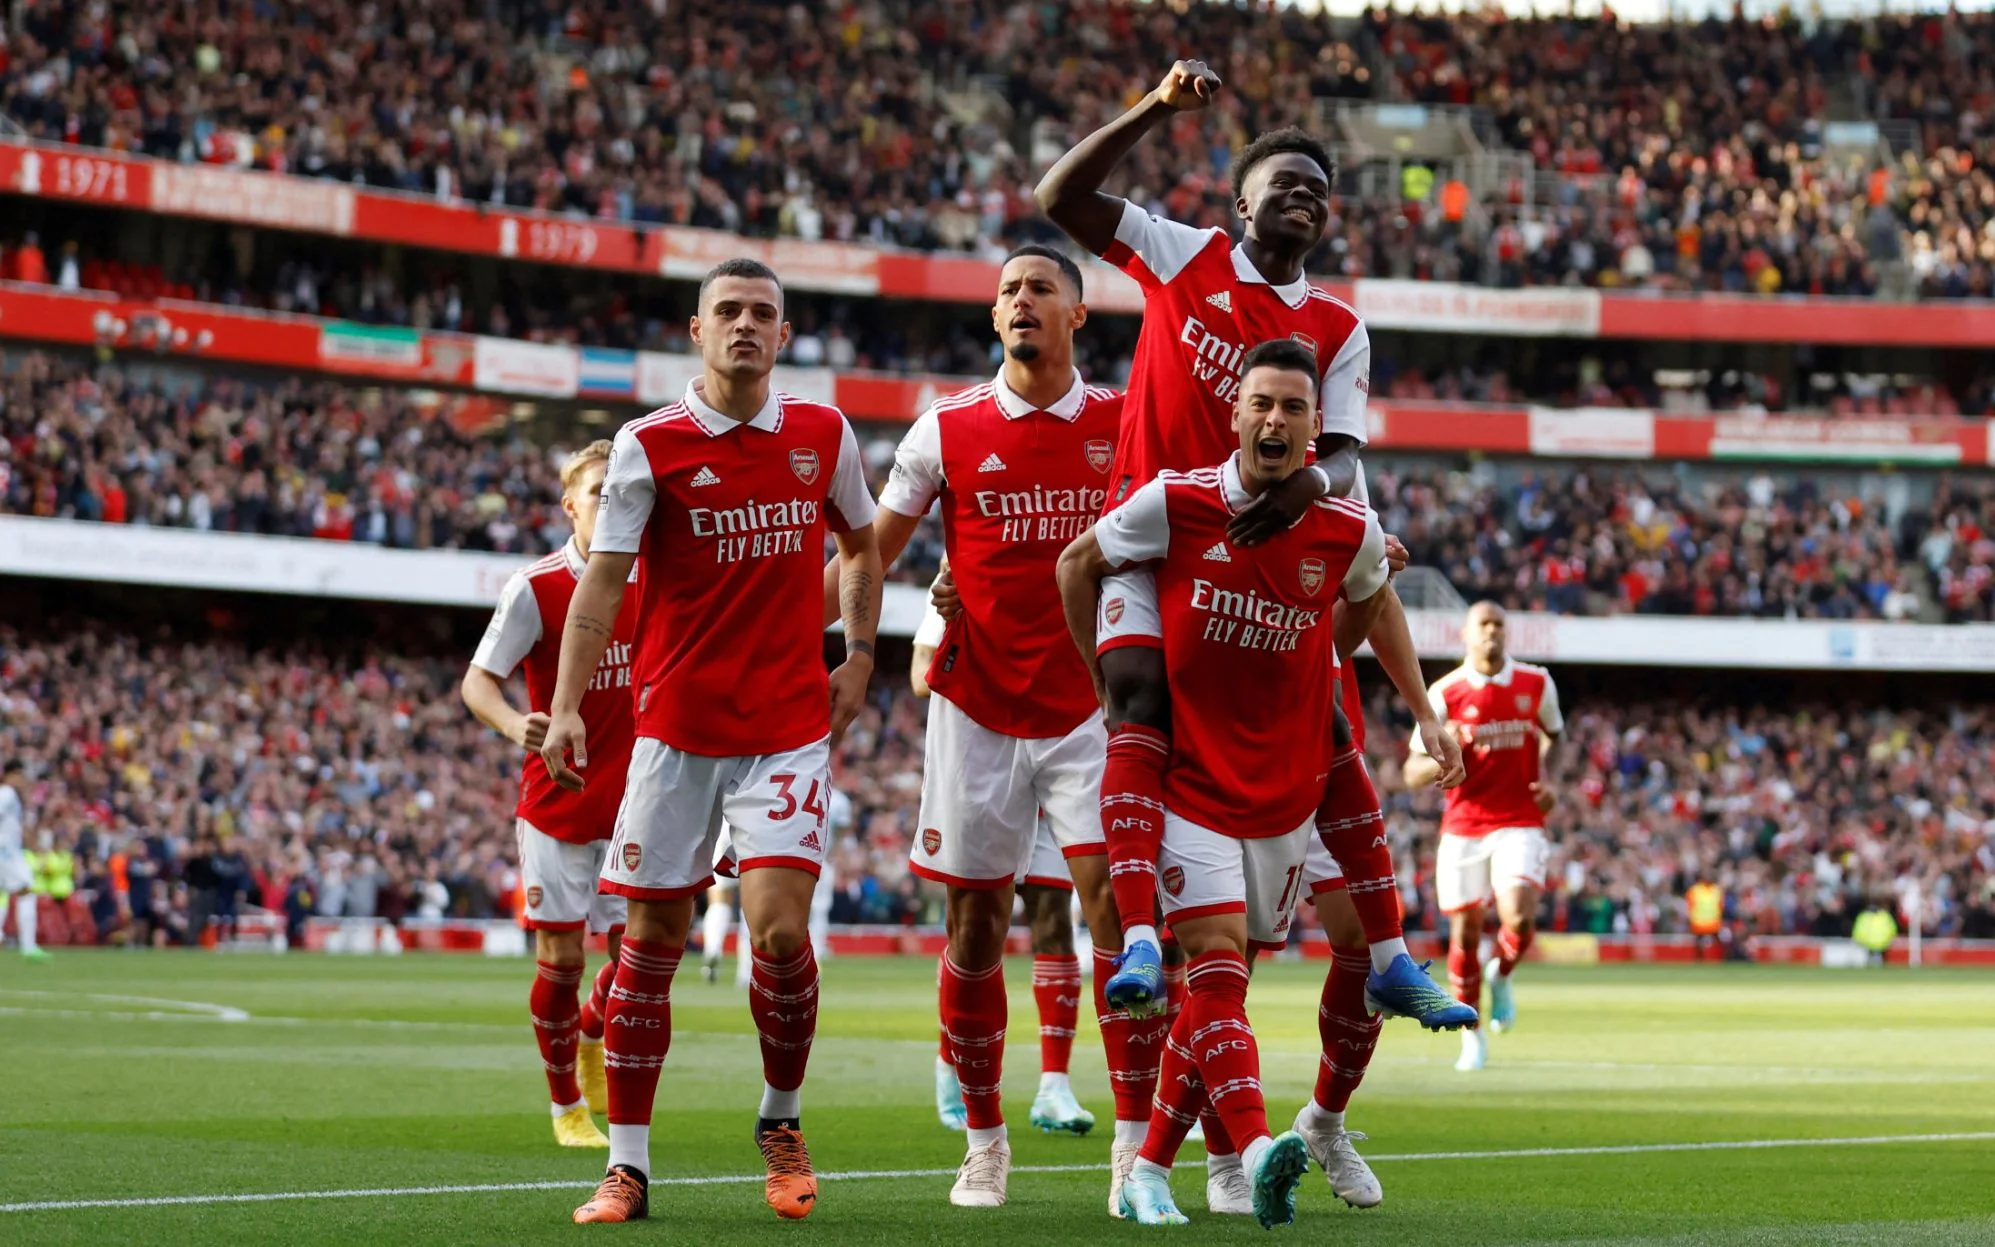 Gunners fans dreaming of Premier League title after outstanding victory over Tottenham